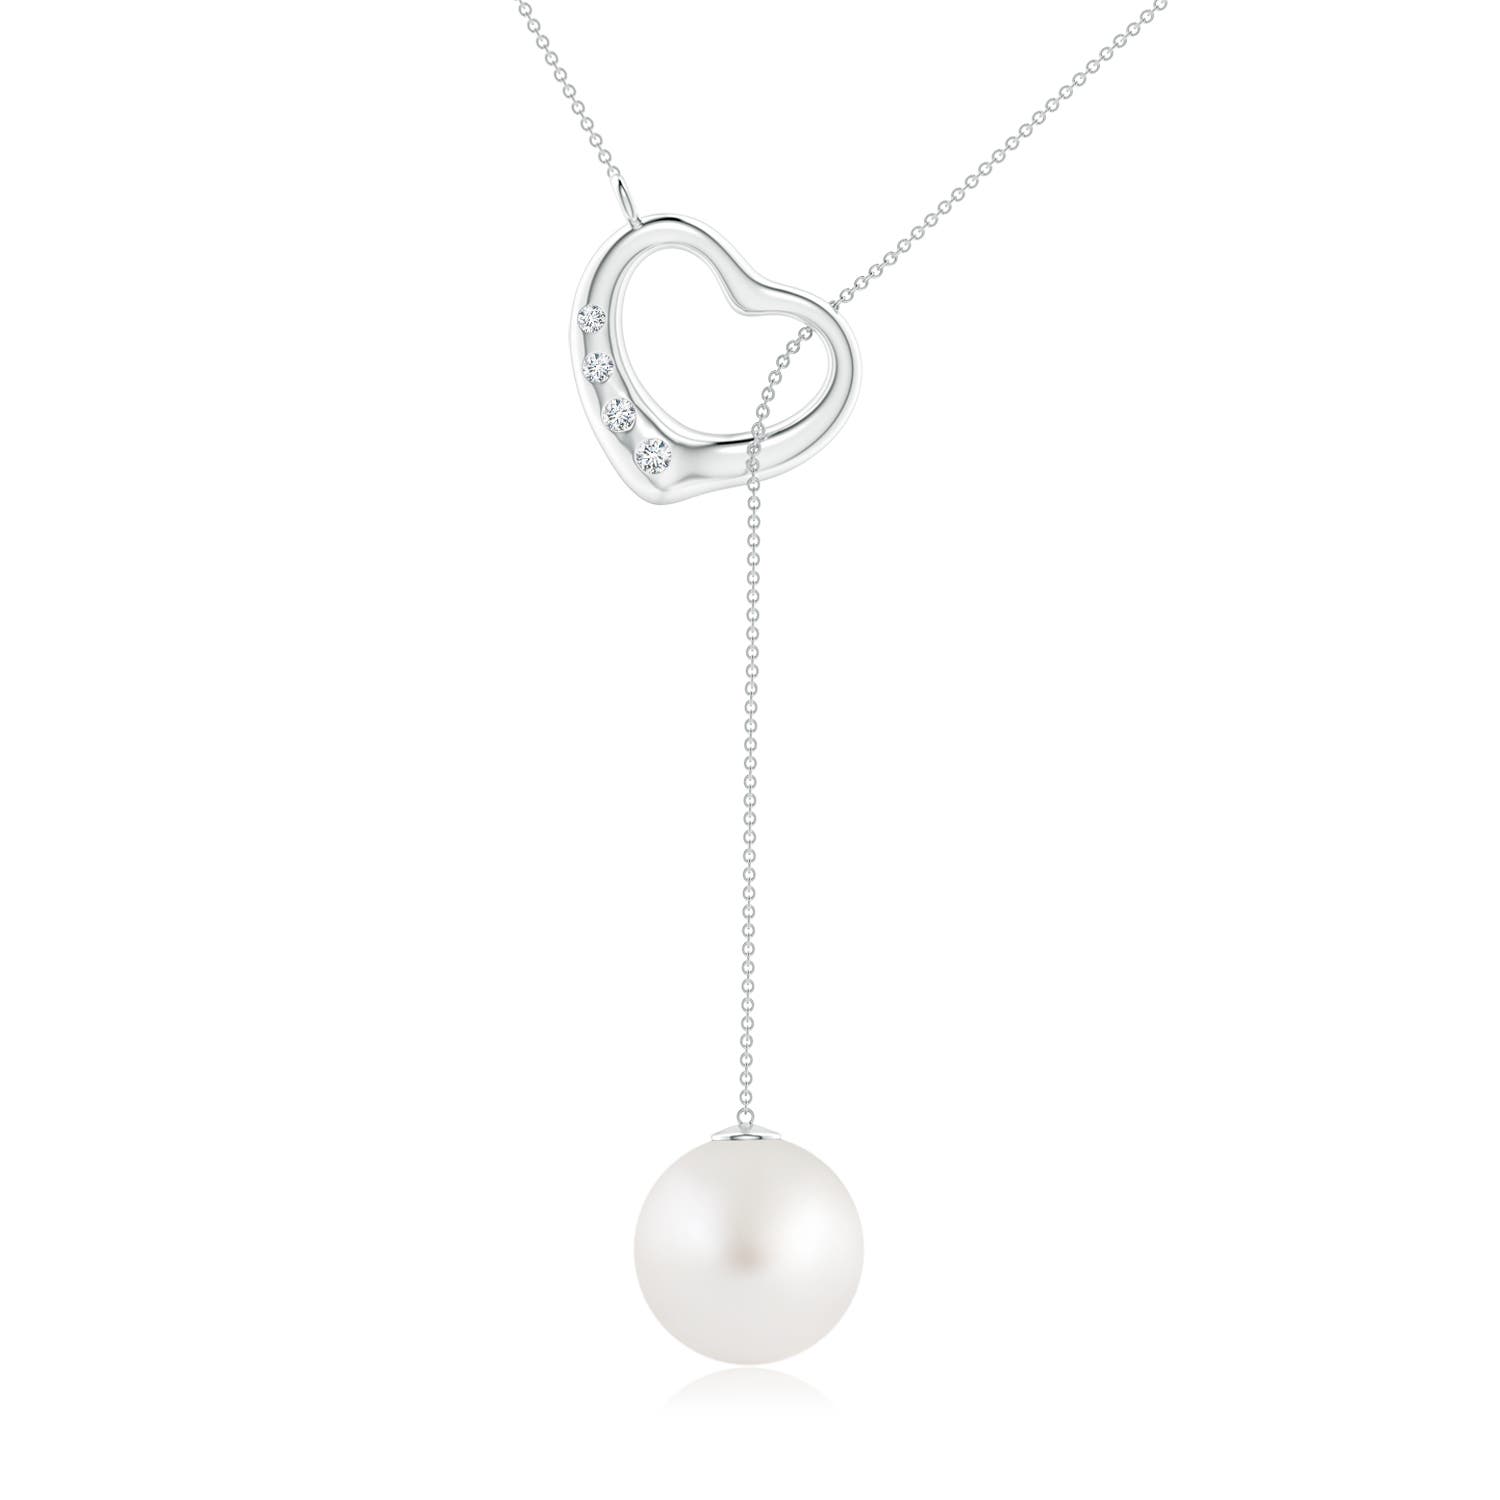 Pearls Are Making a Comeback—Here's How to Wear Them